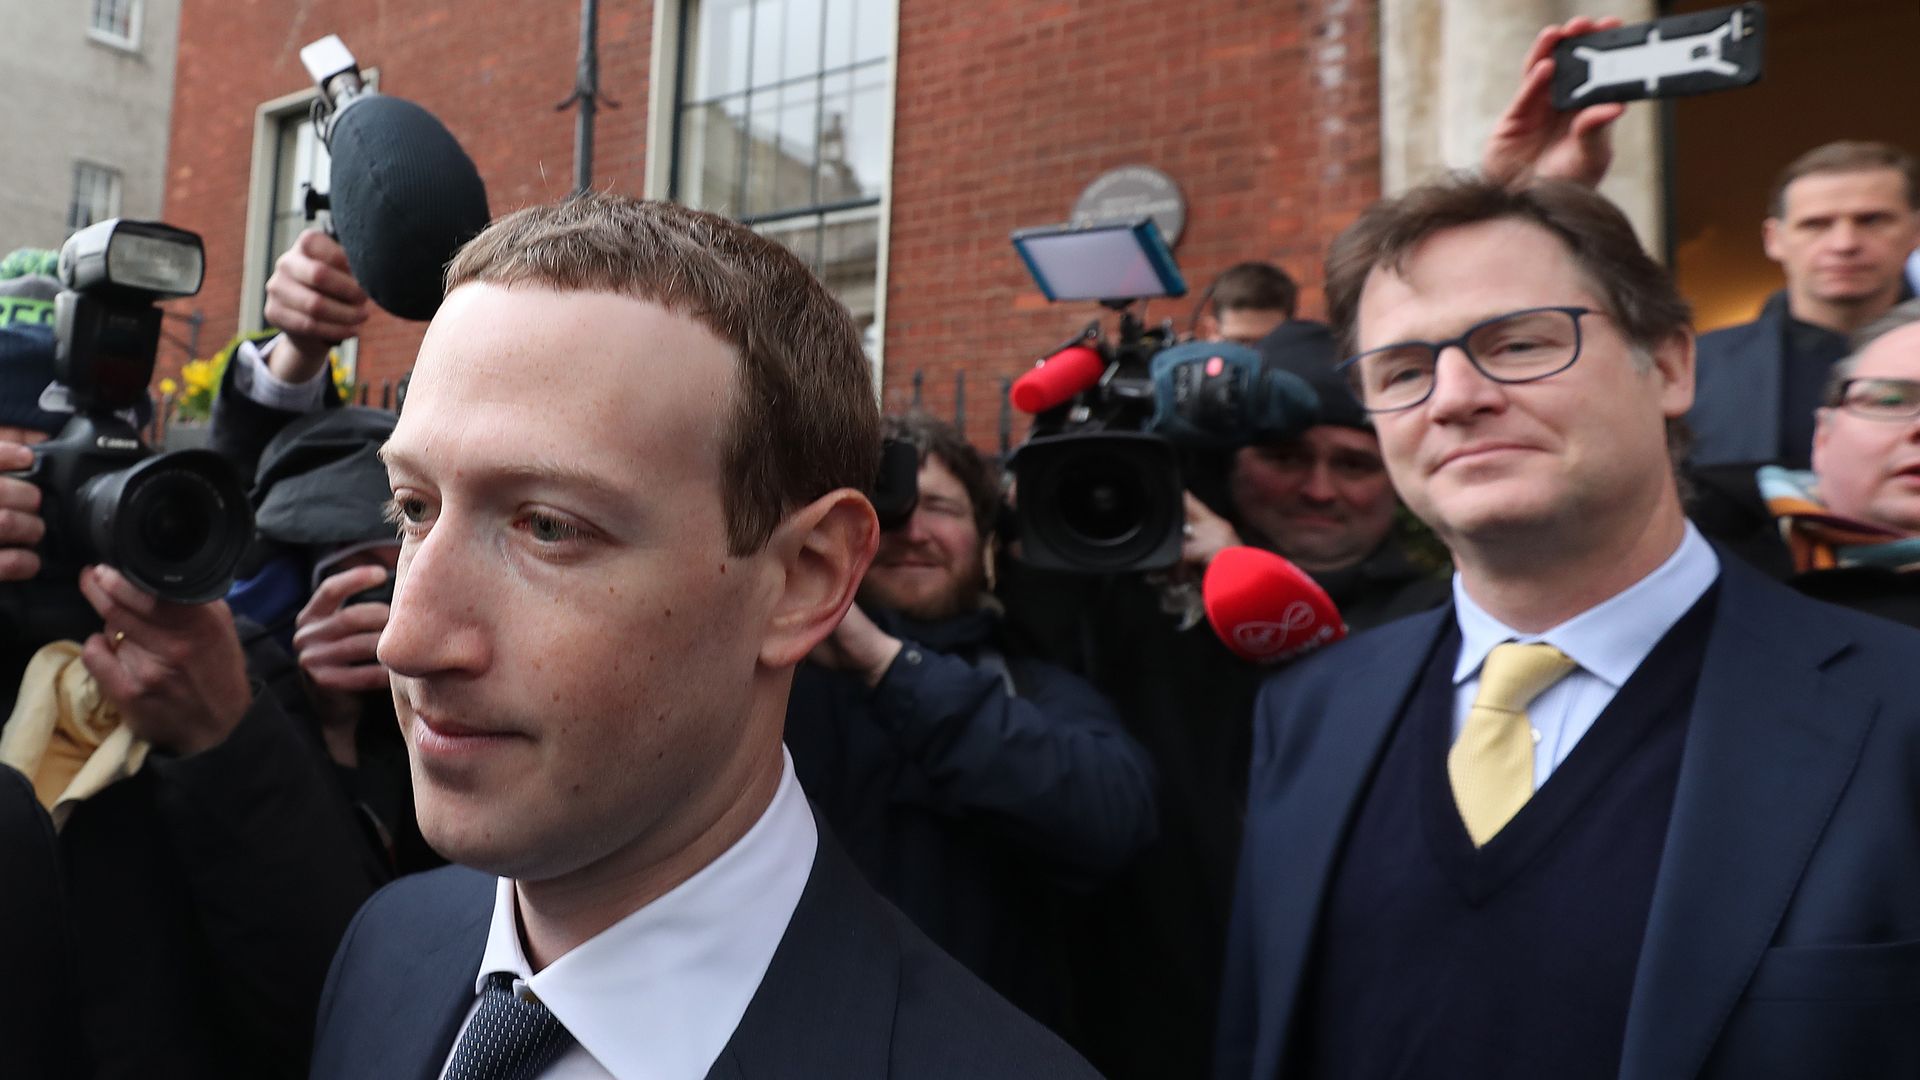  Facebook CEO Mark Zuckerberg leaving The Merrion Hotel in Dublin with as its head of global policy and communications Nick Clegg after a meeting with politicians